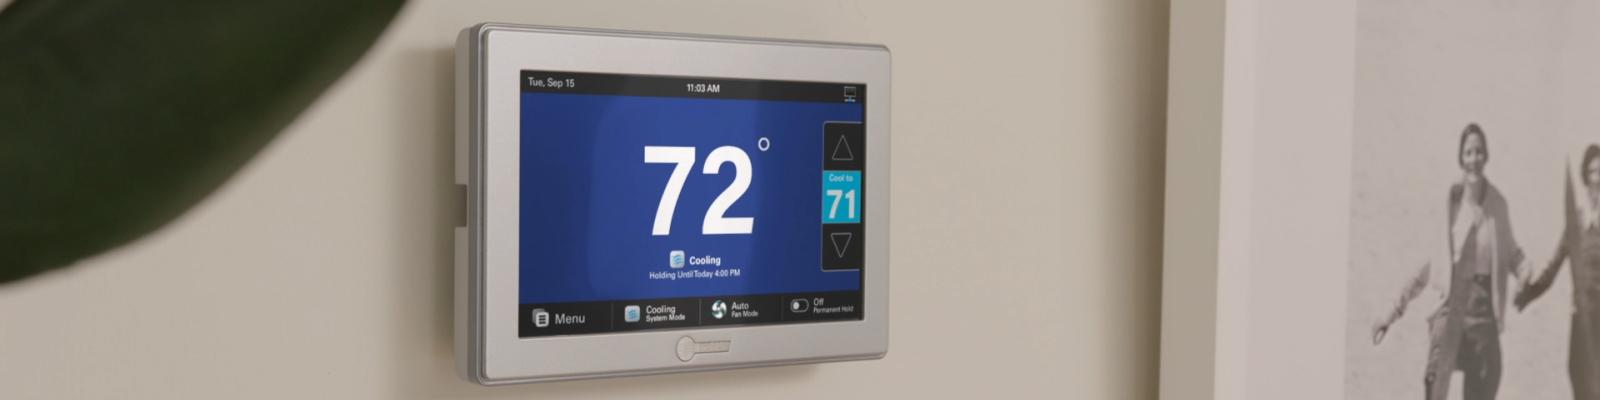 A Trane smart thermostat set to 72 degrees is hanging on a wall next to a family photo.